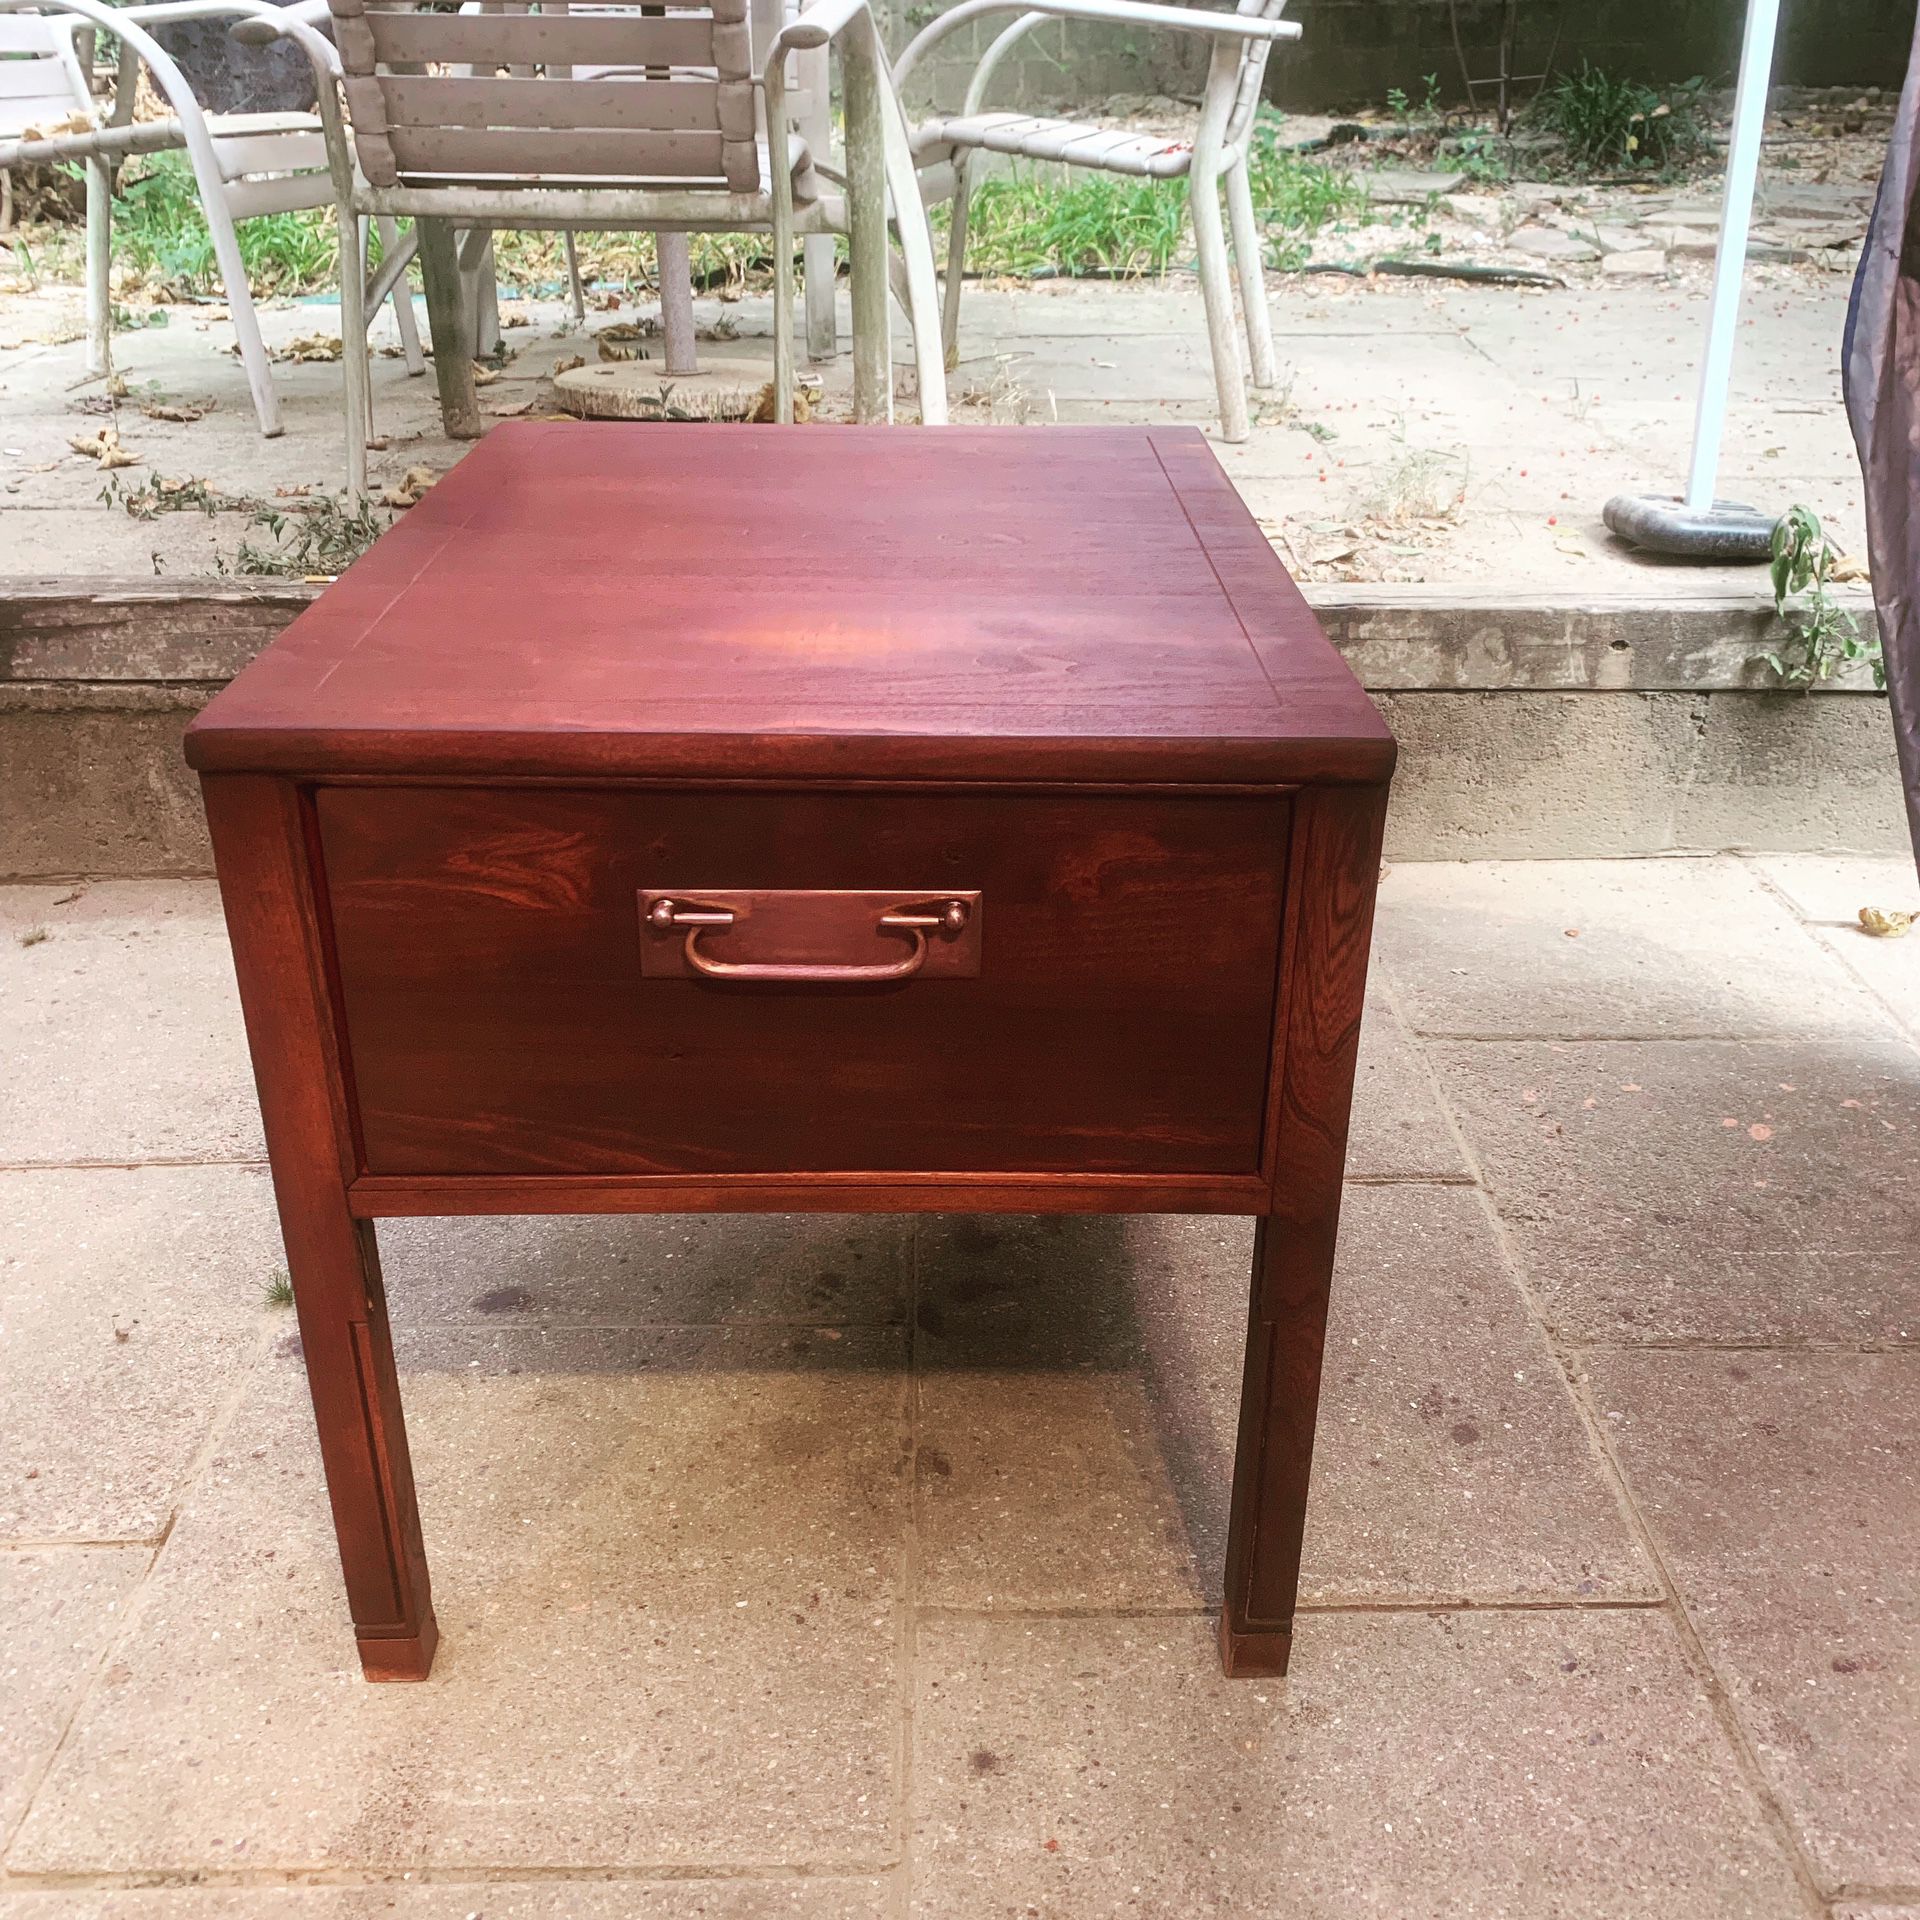 Antique night stands / end tables